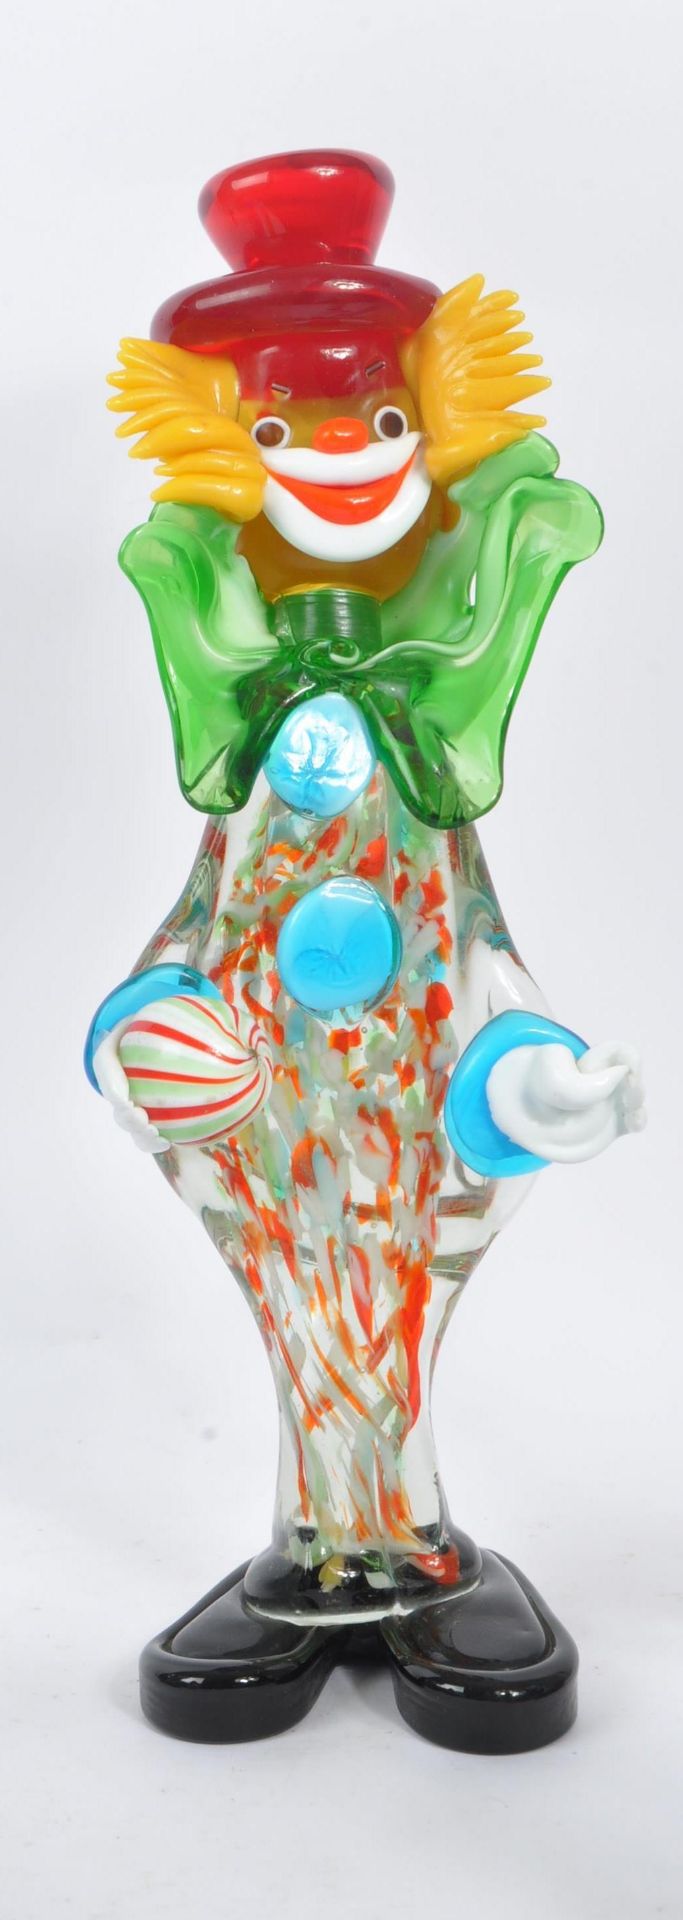 COLLECTION OF FIVE STUDIO GLASS MURANO CLOWNS - Image 4 of 7